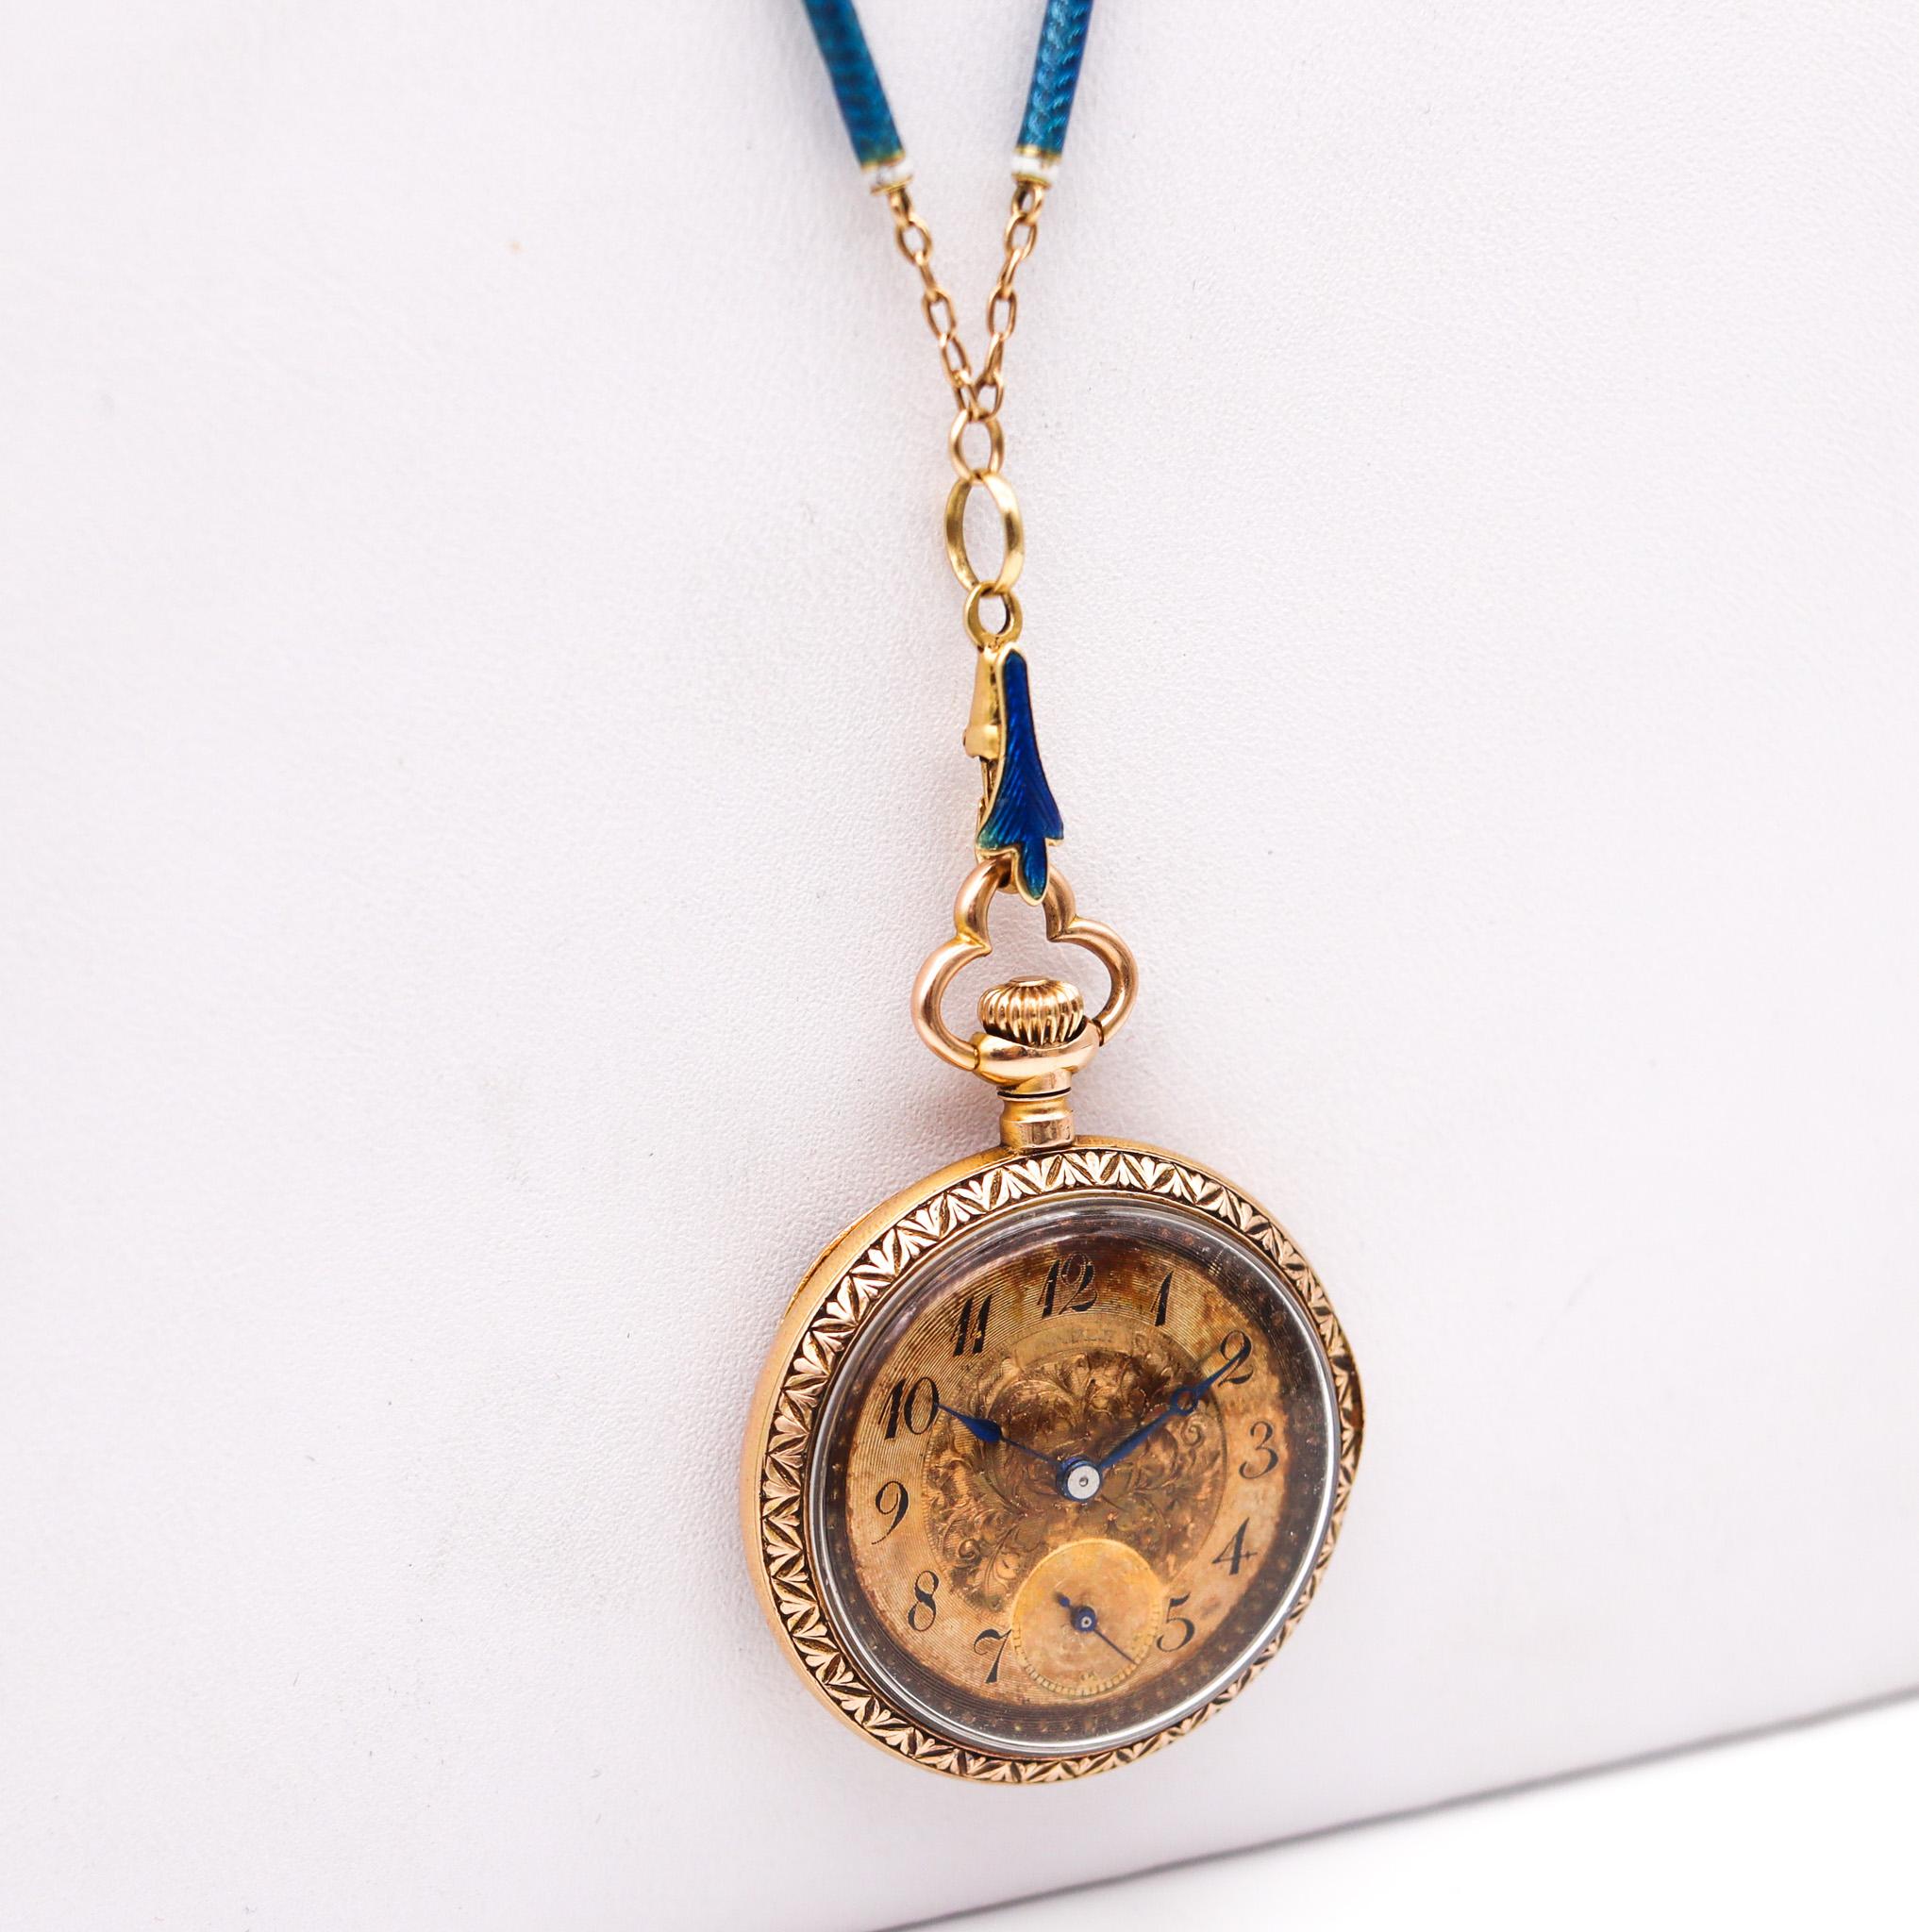 Edwardian Gruen pocket-watch pendant chain in guilloche.

Gorgeous long necklace with an open face pocket-watch, created in Geneva Switzerland during the Edwardian period, back in the 1900's. The movement is Swiss signed for the Gruen Watch Co. and